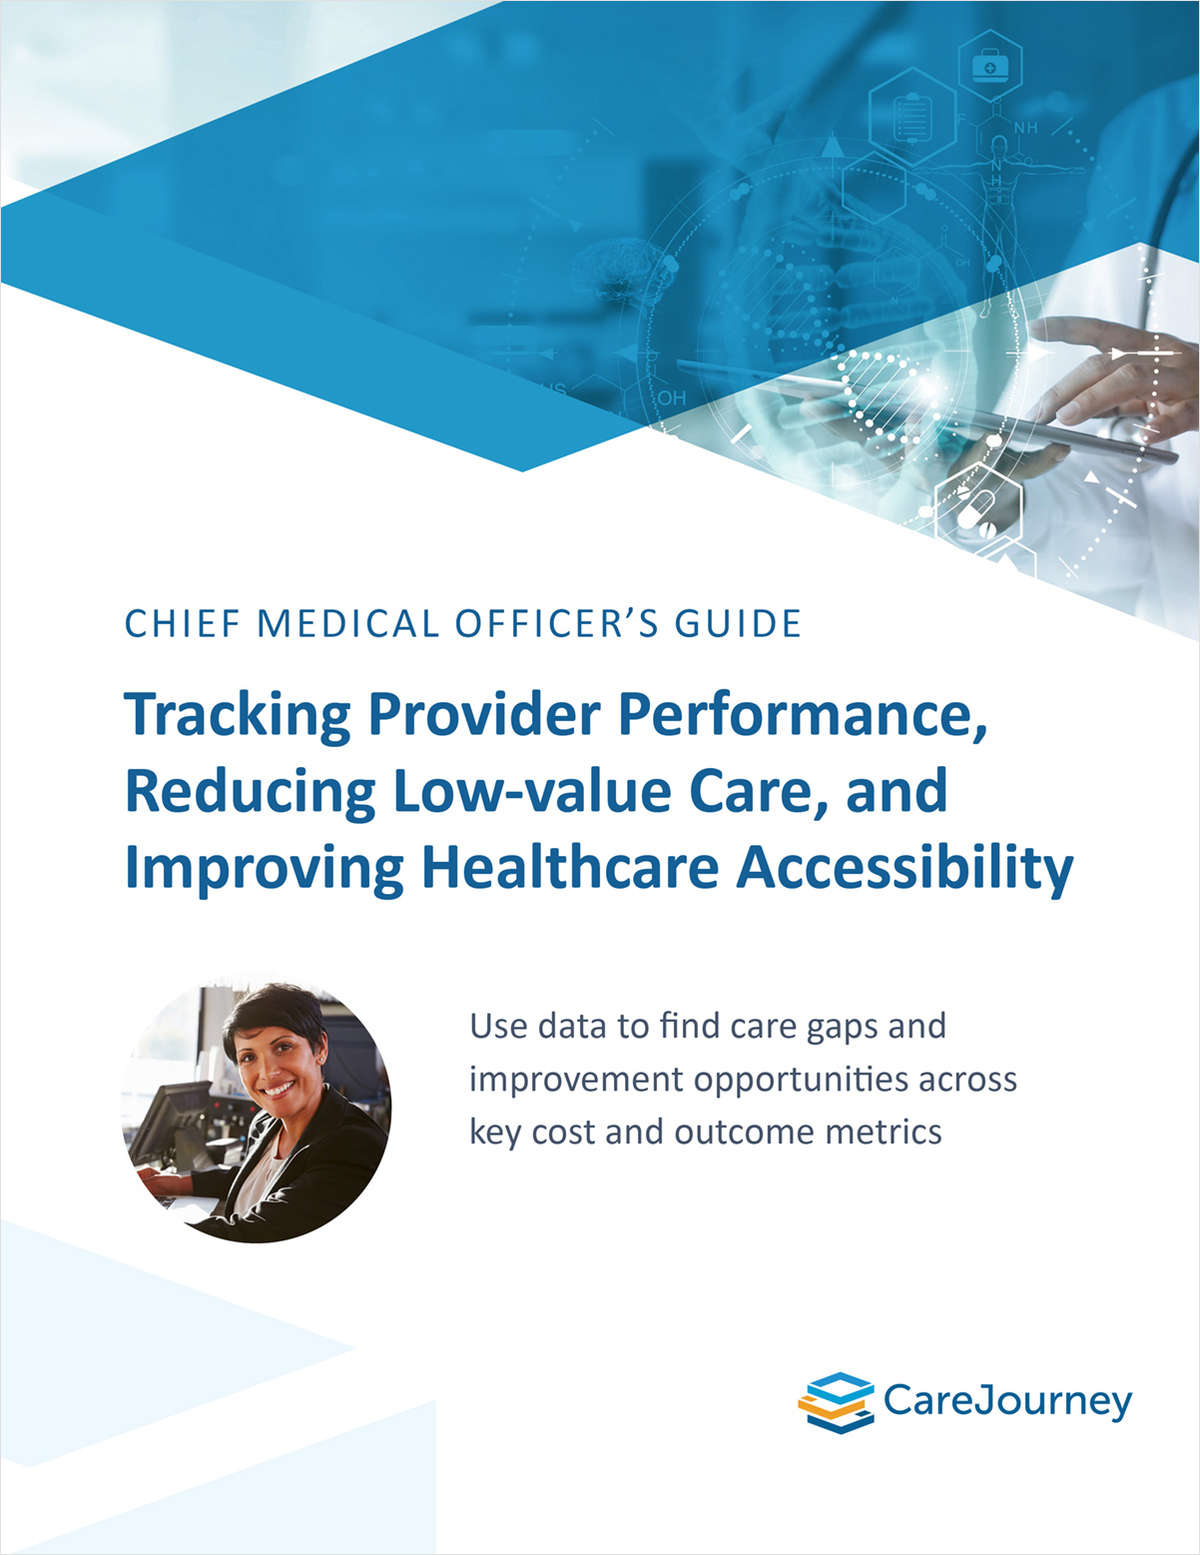 Chief Medical Officer's Guide to Tracking Provider Performance, Reducing Low-value Care, and Improving Healthcare Accessibility